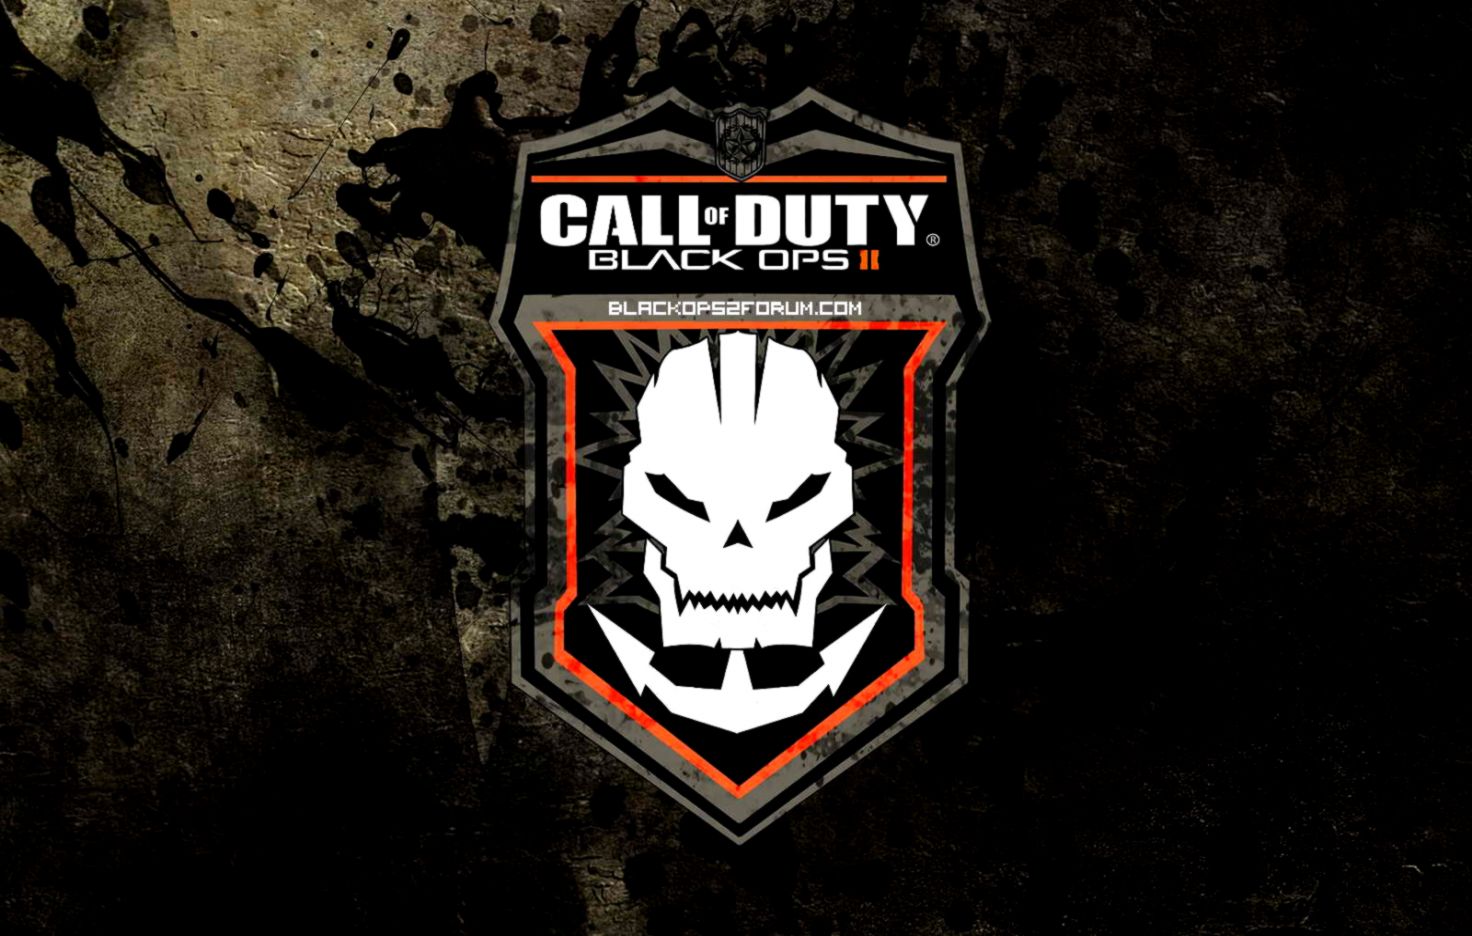 Call Of Duty Mobile Logo Wallpapers